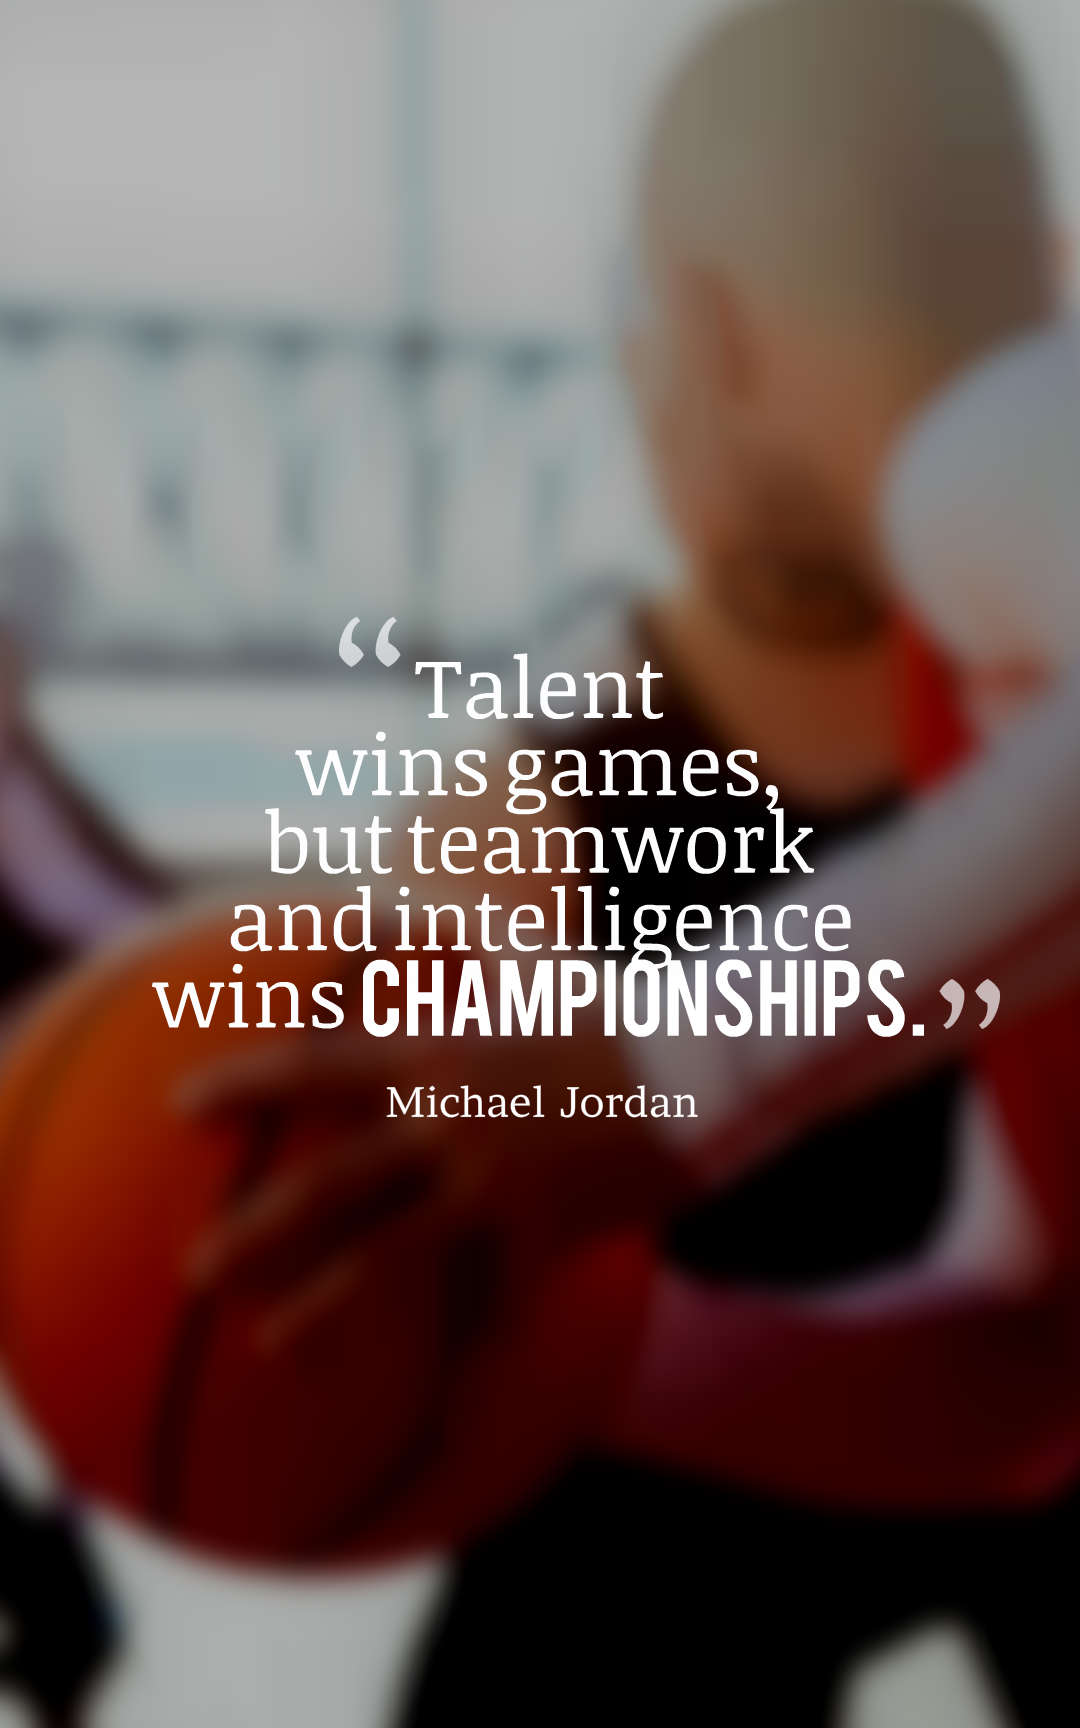 Talent wins games, but teamwork and intelligence wins championships.